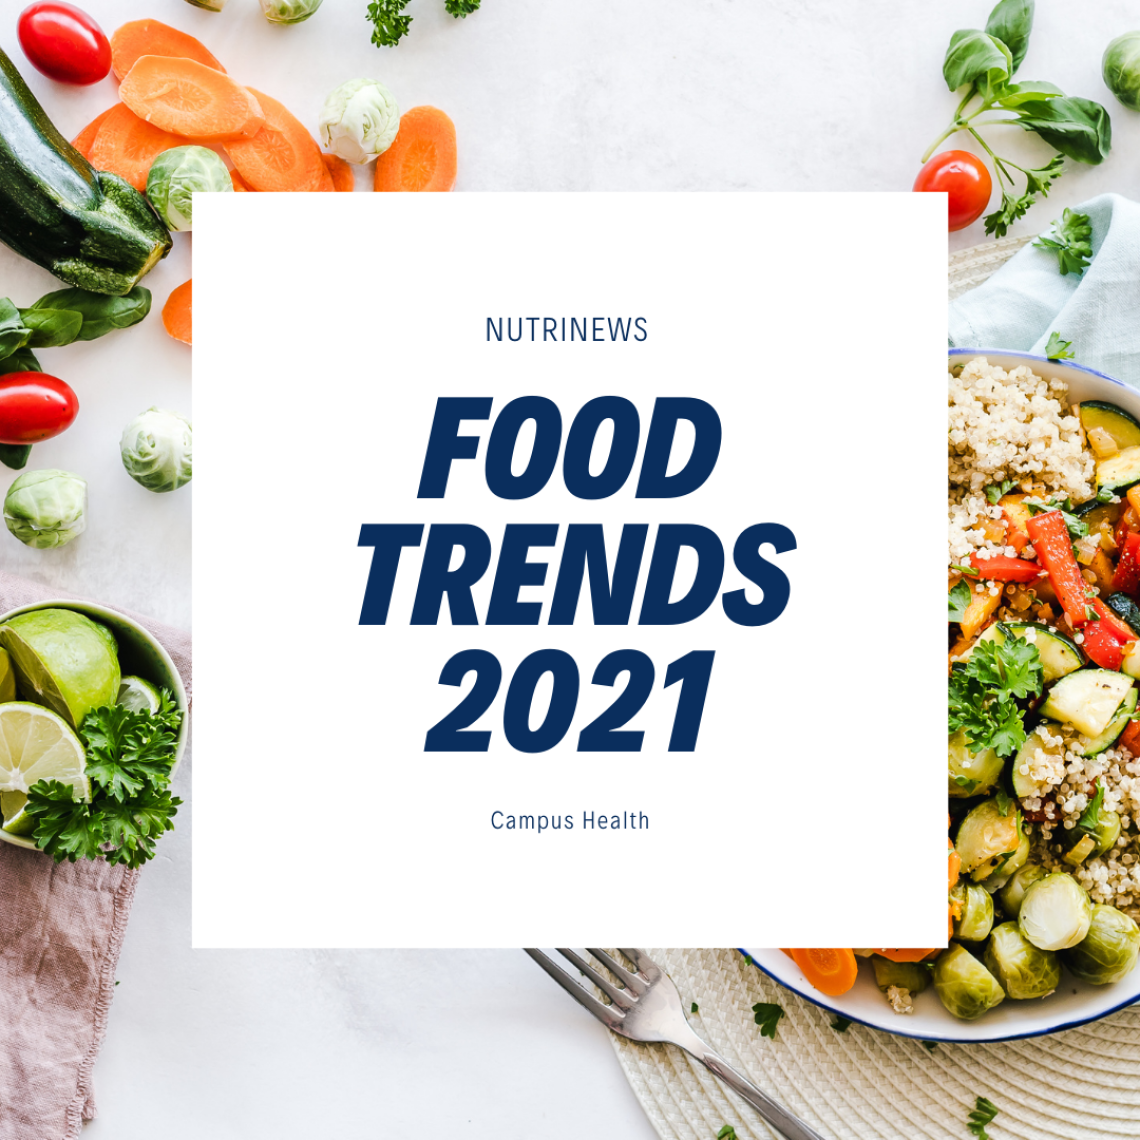 Photo of vegetables and one bowl of vegetables, text reads: Food Trends 2021